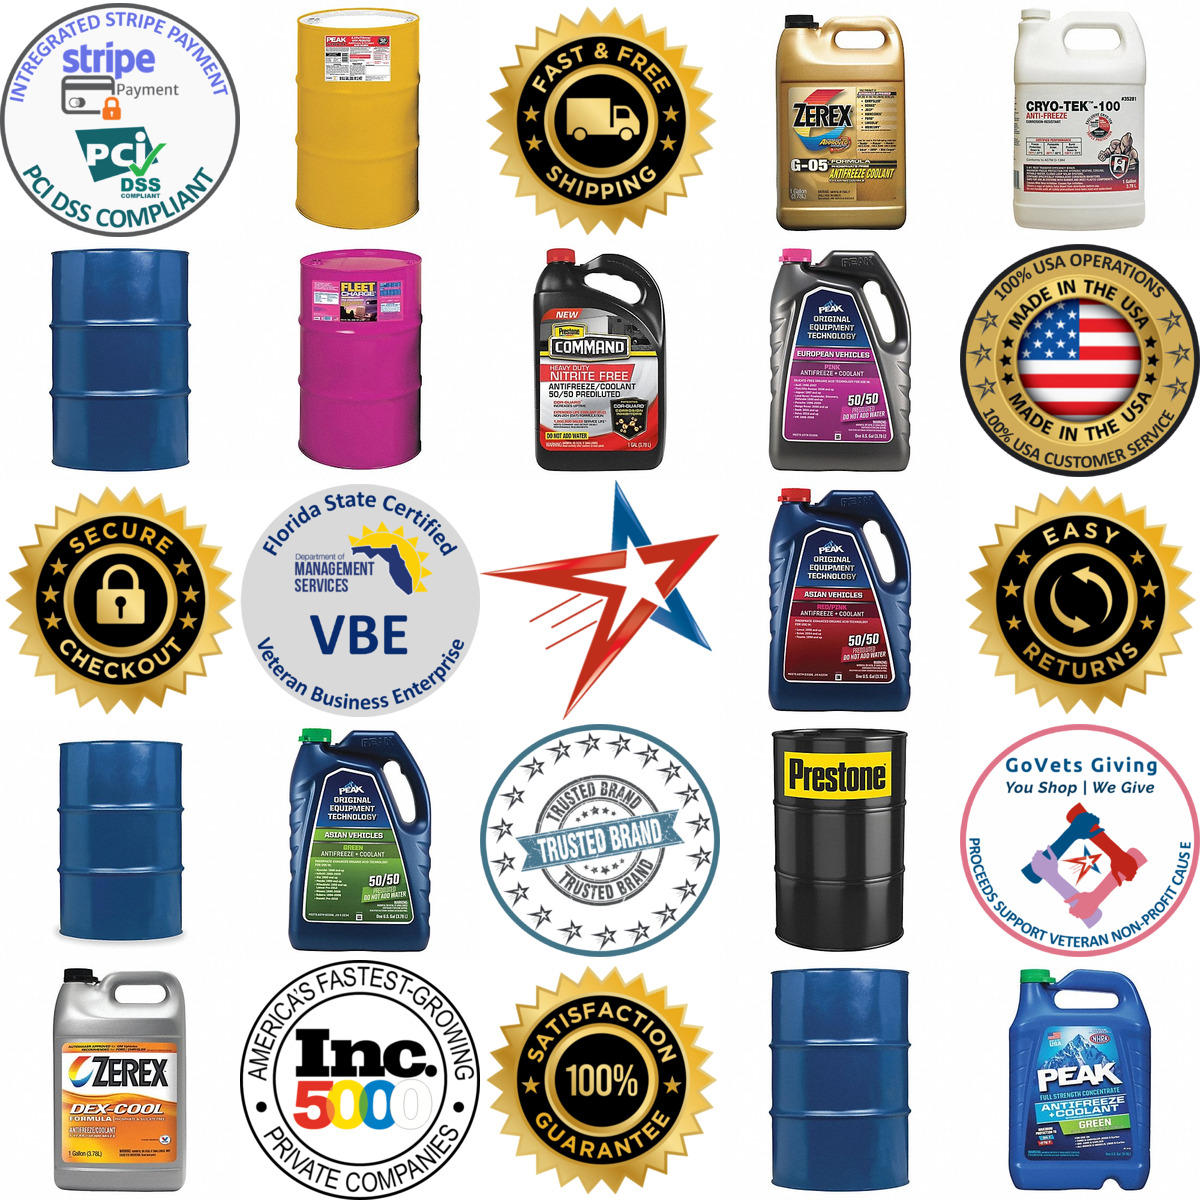 A selection of Antifreeze and Coolants products on GoVets